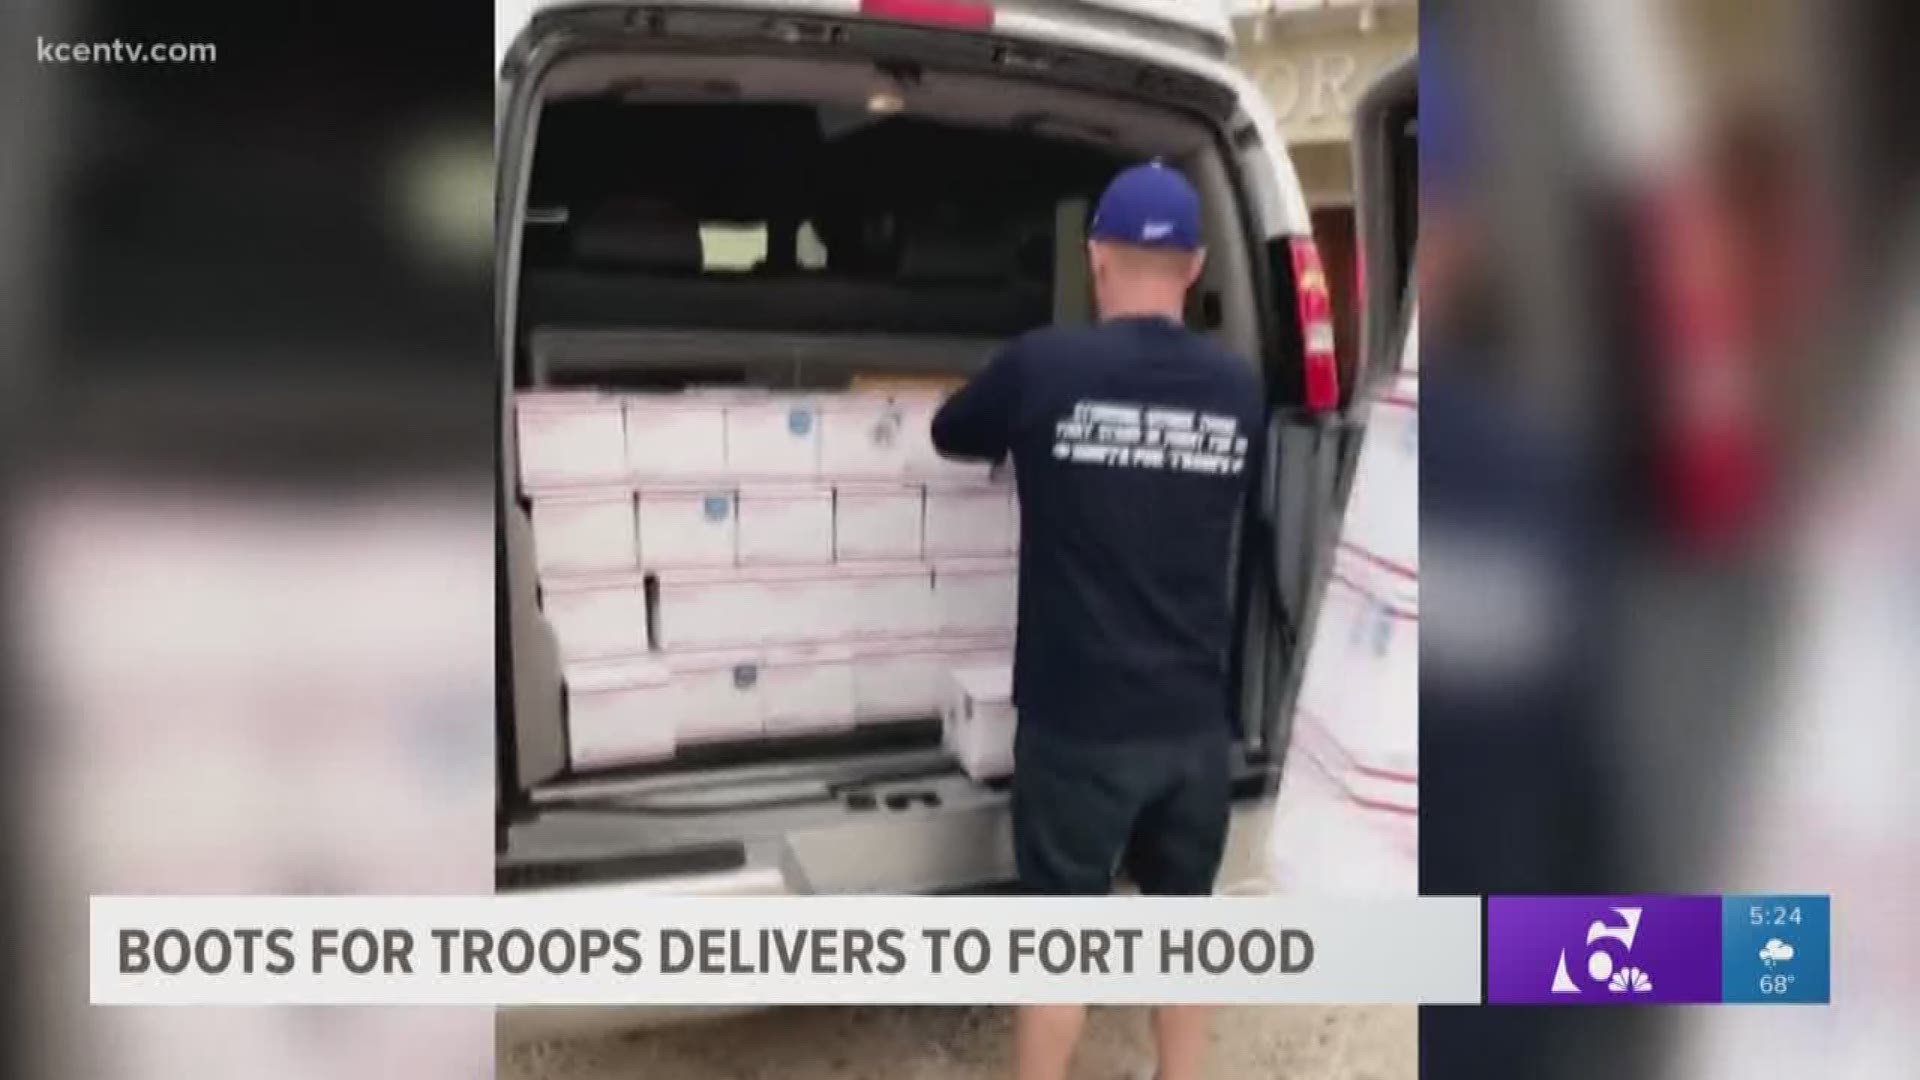 Based out of Houston, the company hopes to make soldiers smile.